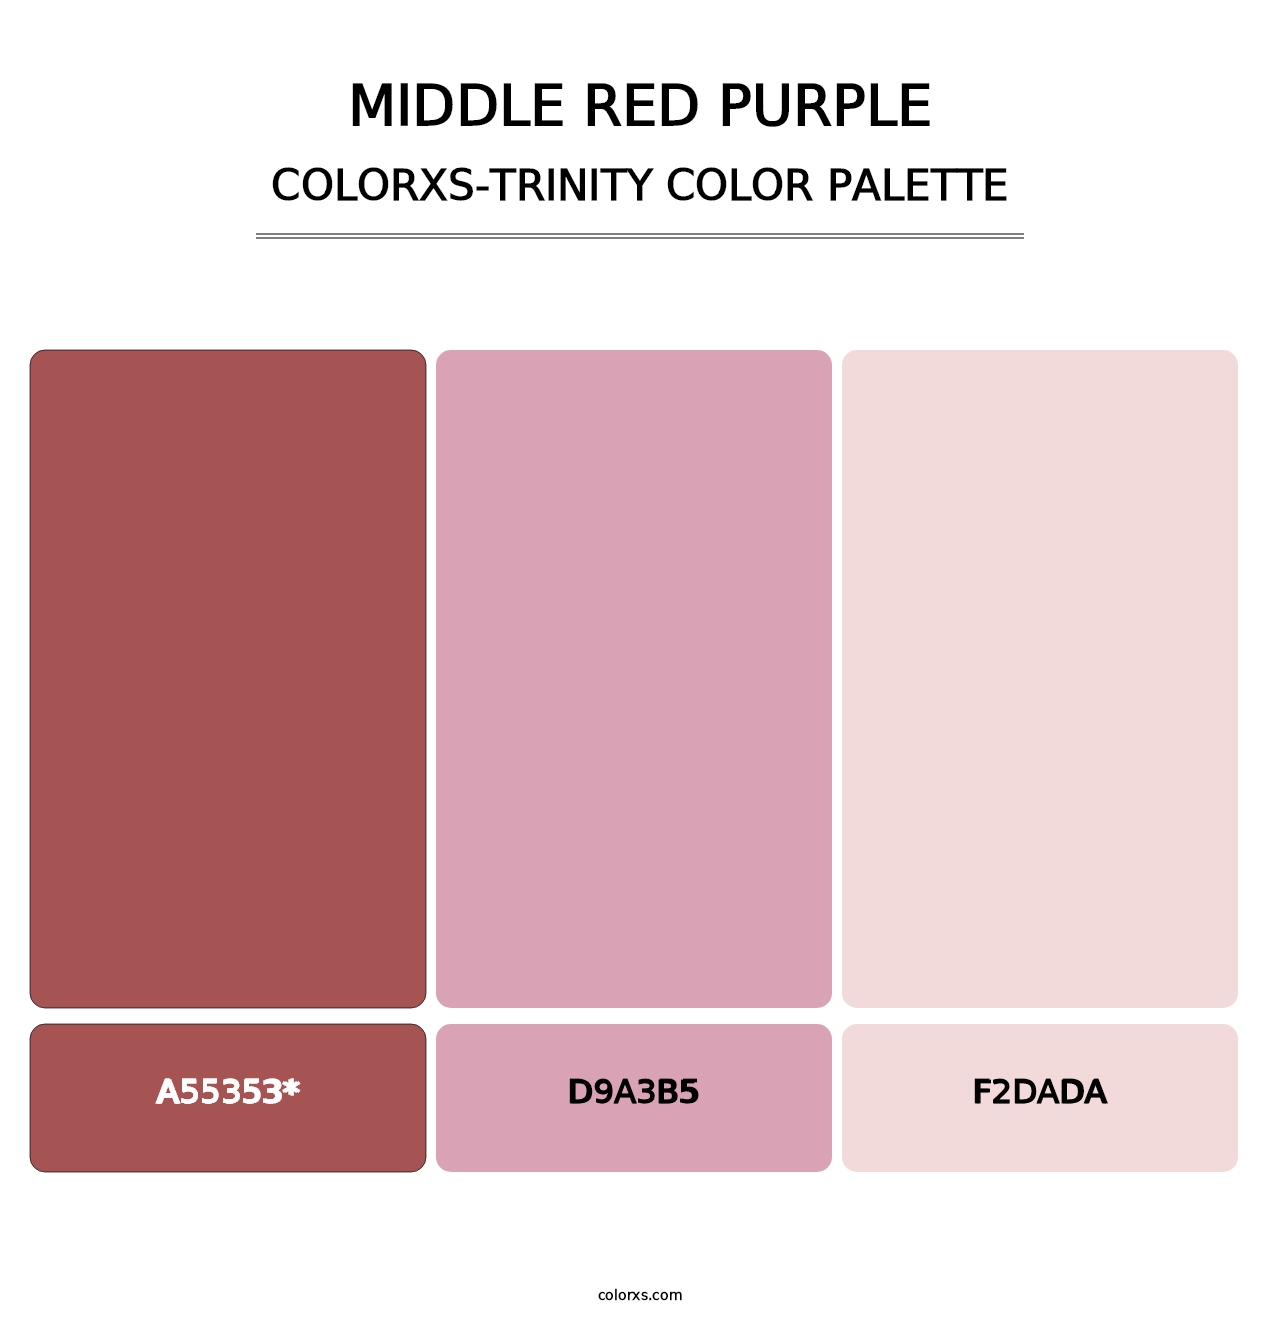 Middle Red Purple - Colorxs Trinity Palette